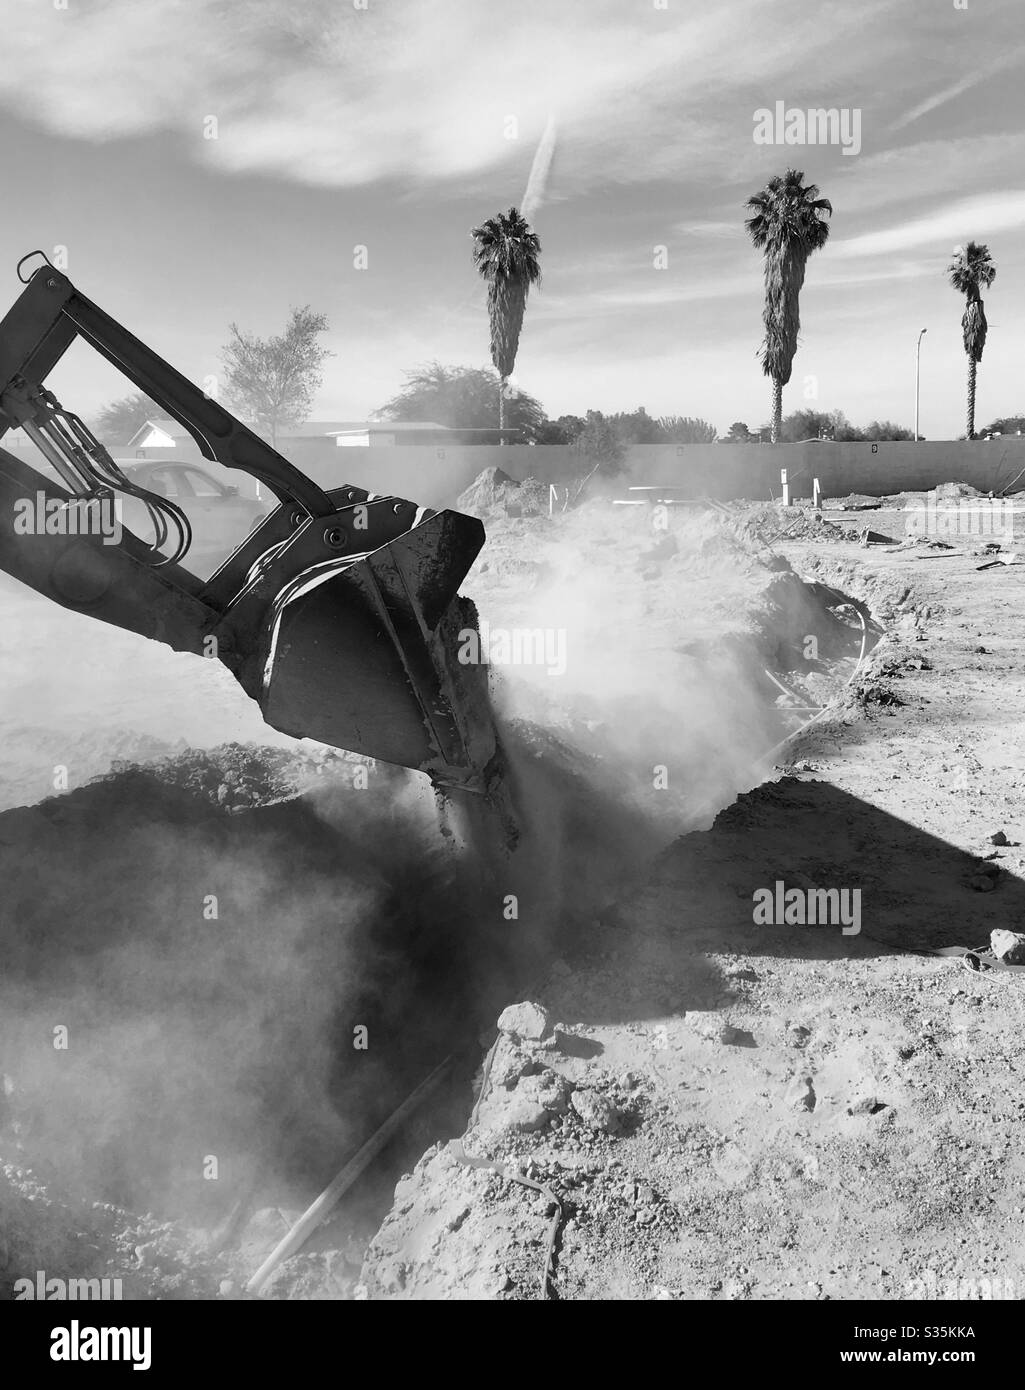 Black white, back home, digging ditch, replacing wiring, RV parking lot, dust in air, desert dirt, background, brick wall, palm trees, blue sky, clouds, copy space, equipment, maintenance, repairs Stock Photo